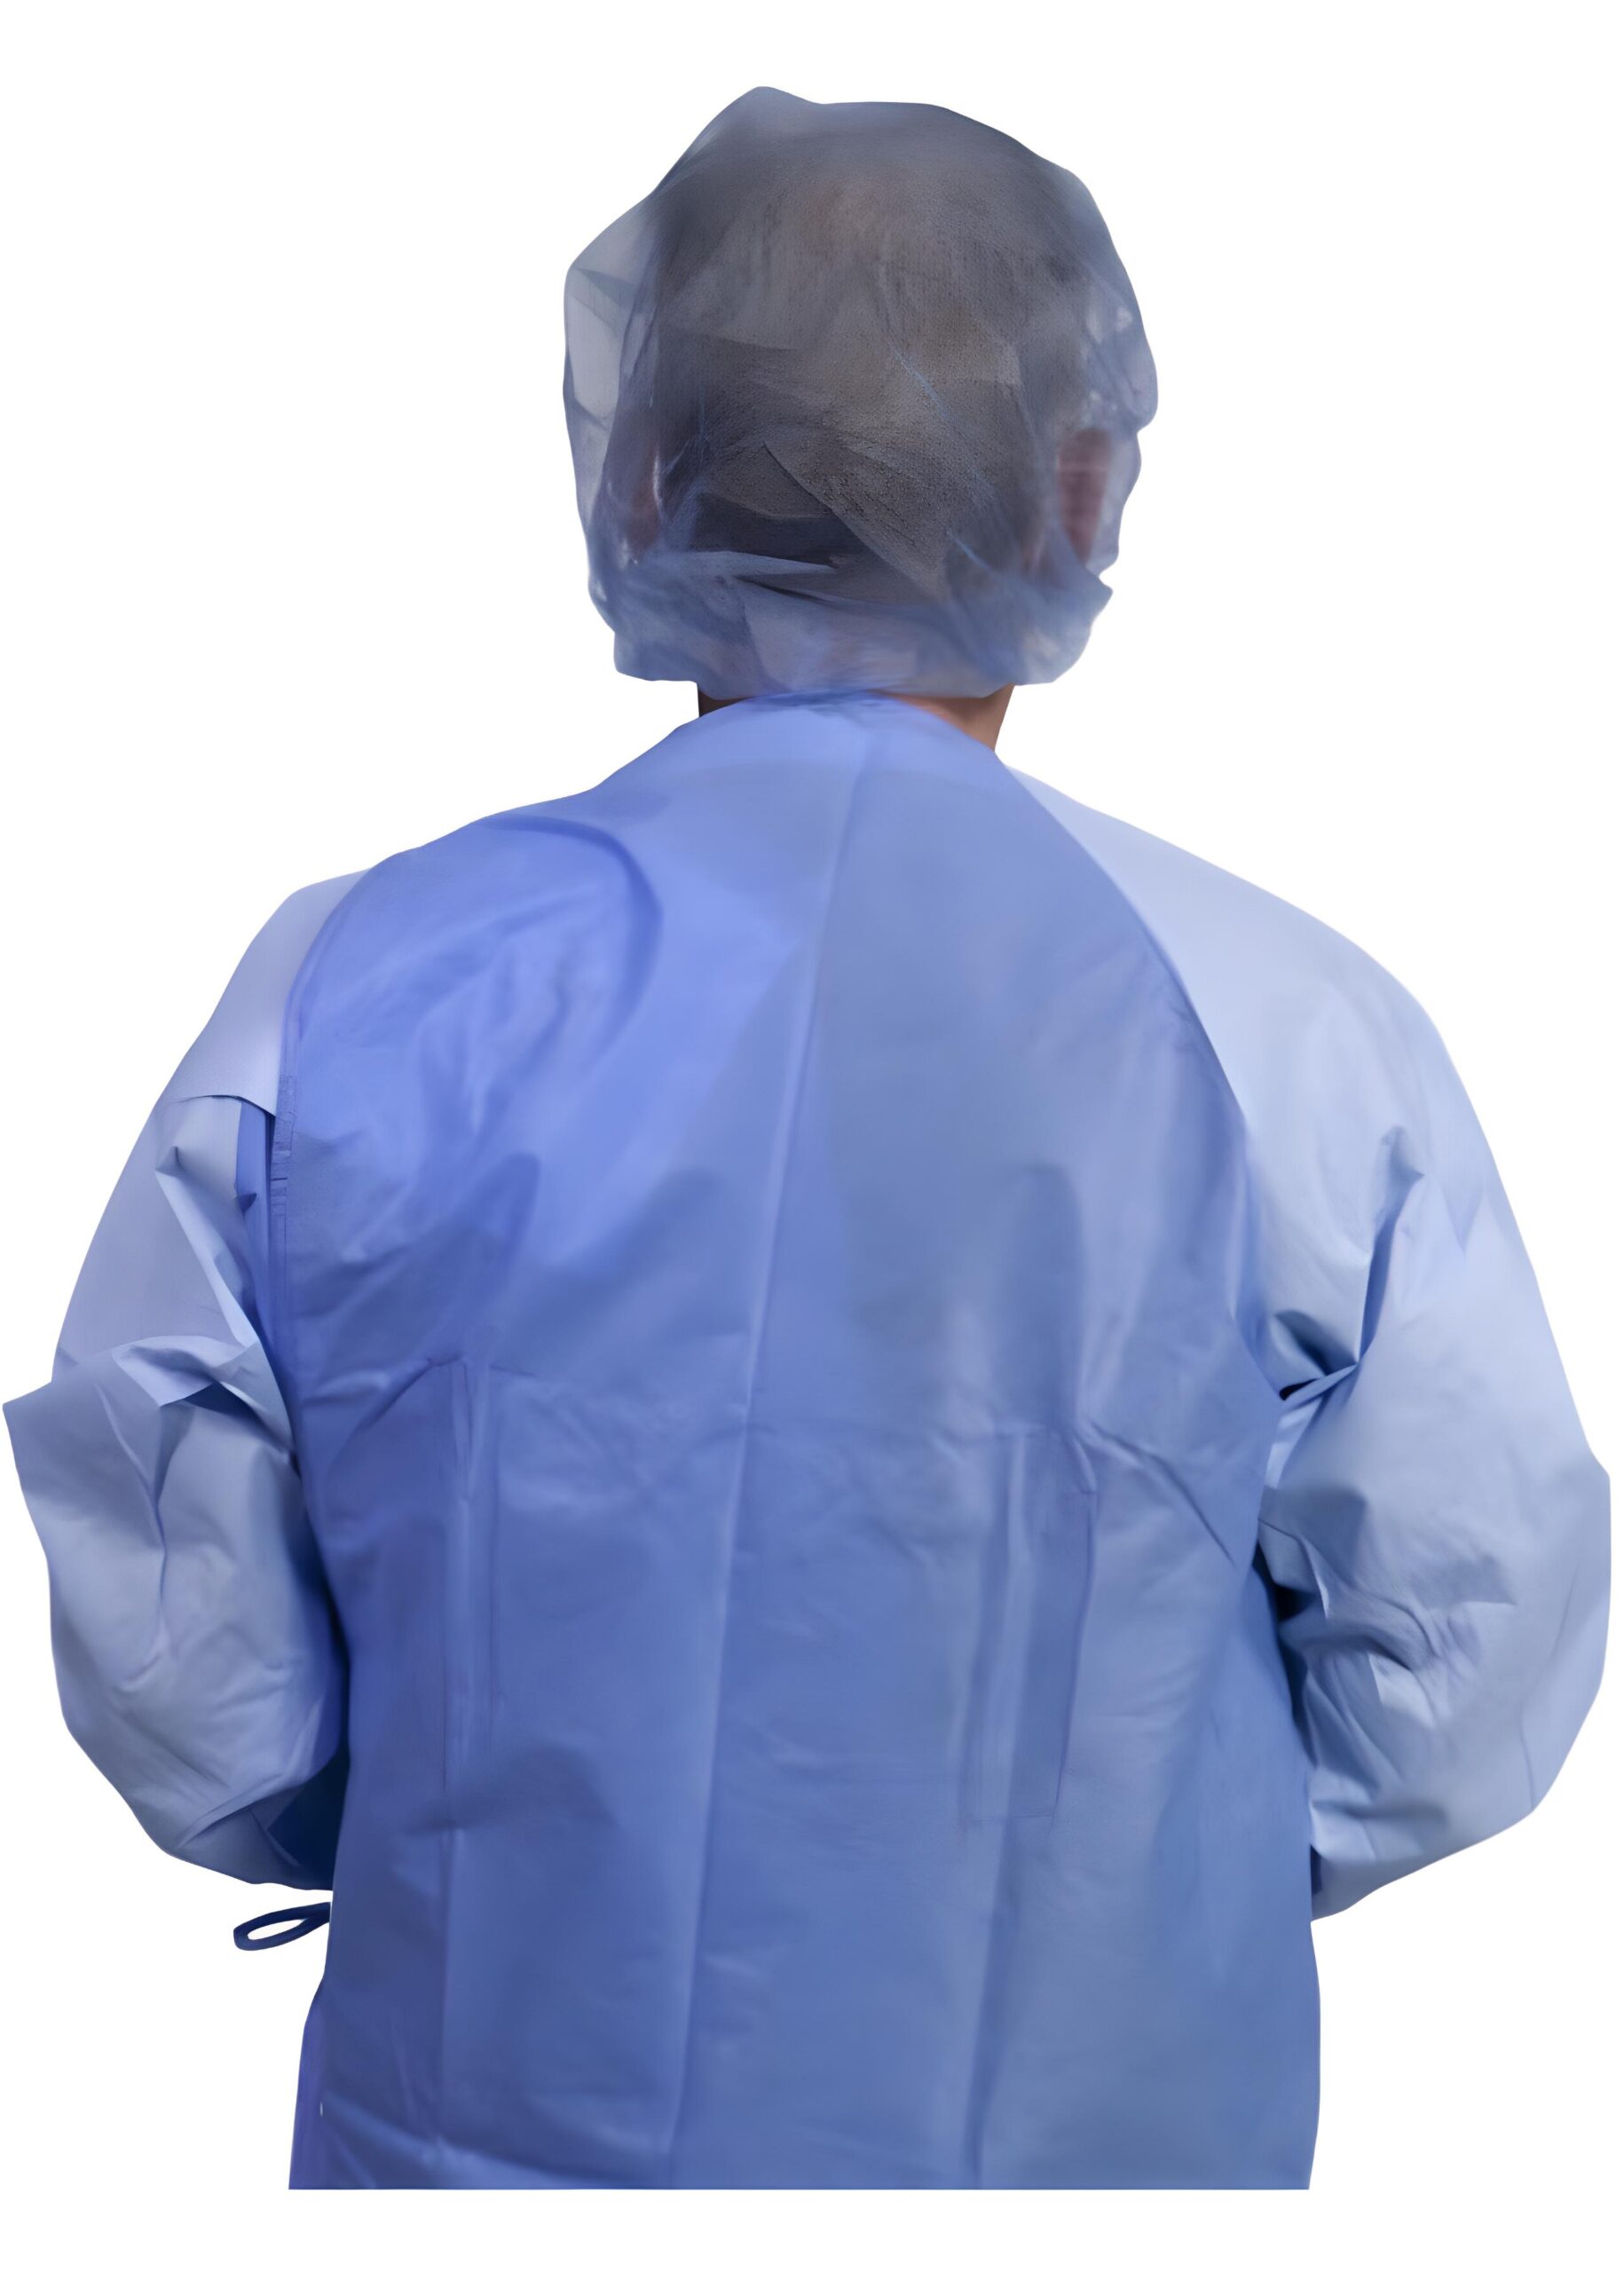 SoloFit Surgical Toga, Hoodless